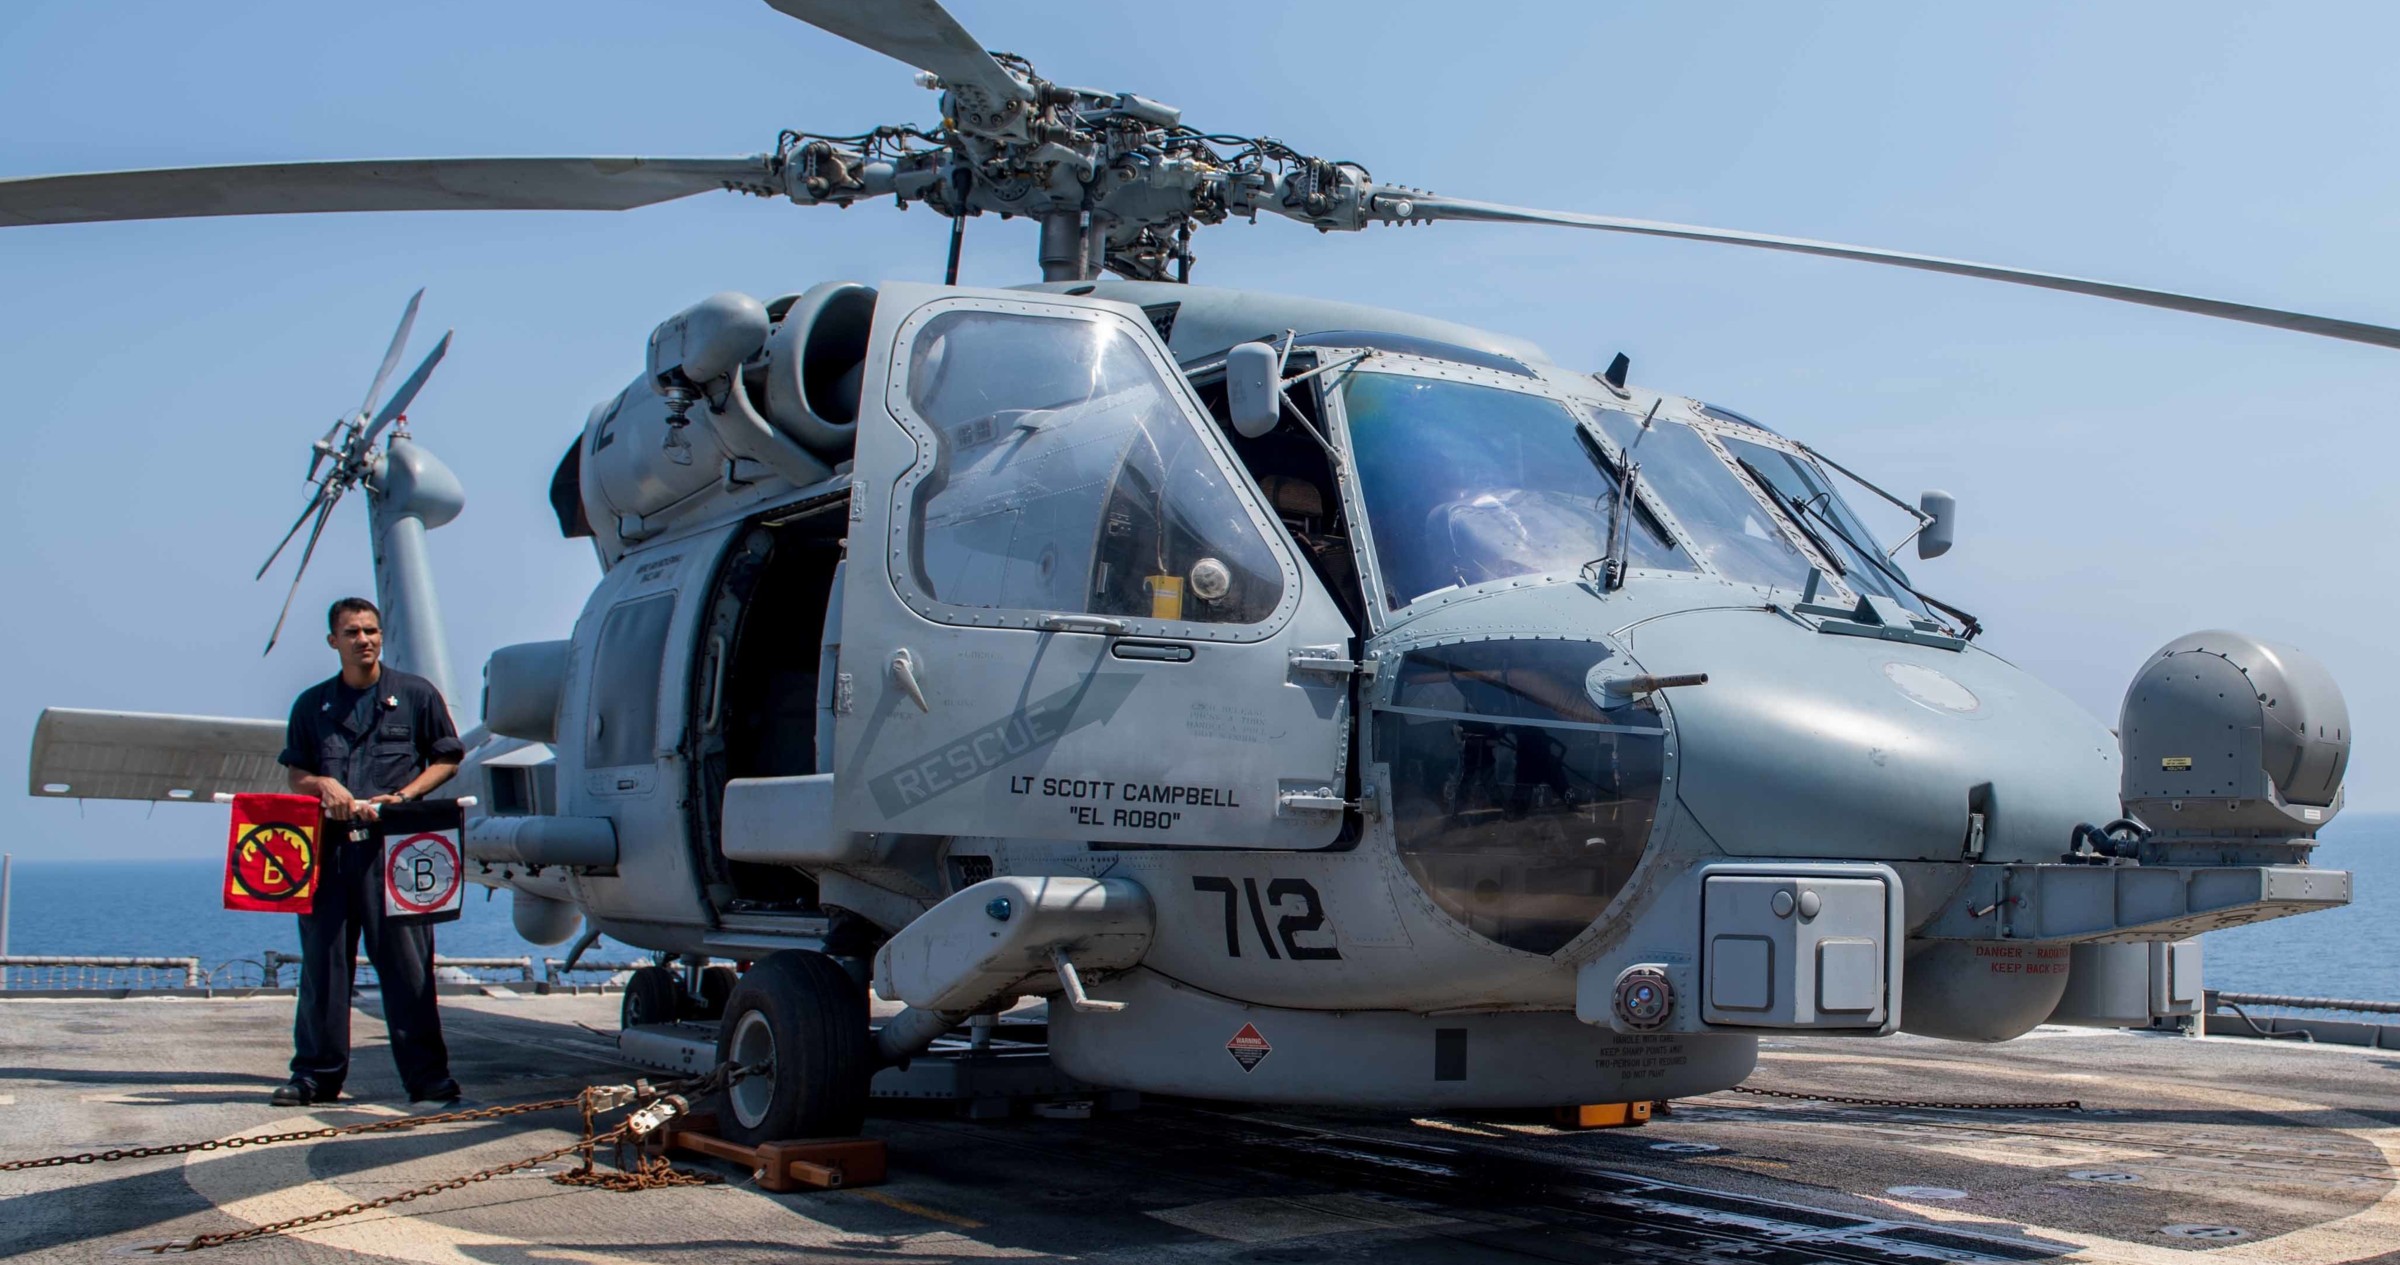 hsm-75 wolfpack helicopter maritime strike squadron us navy mh-60r seahawk 2017 34